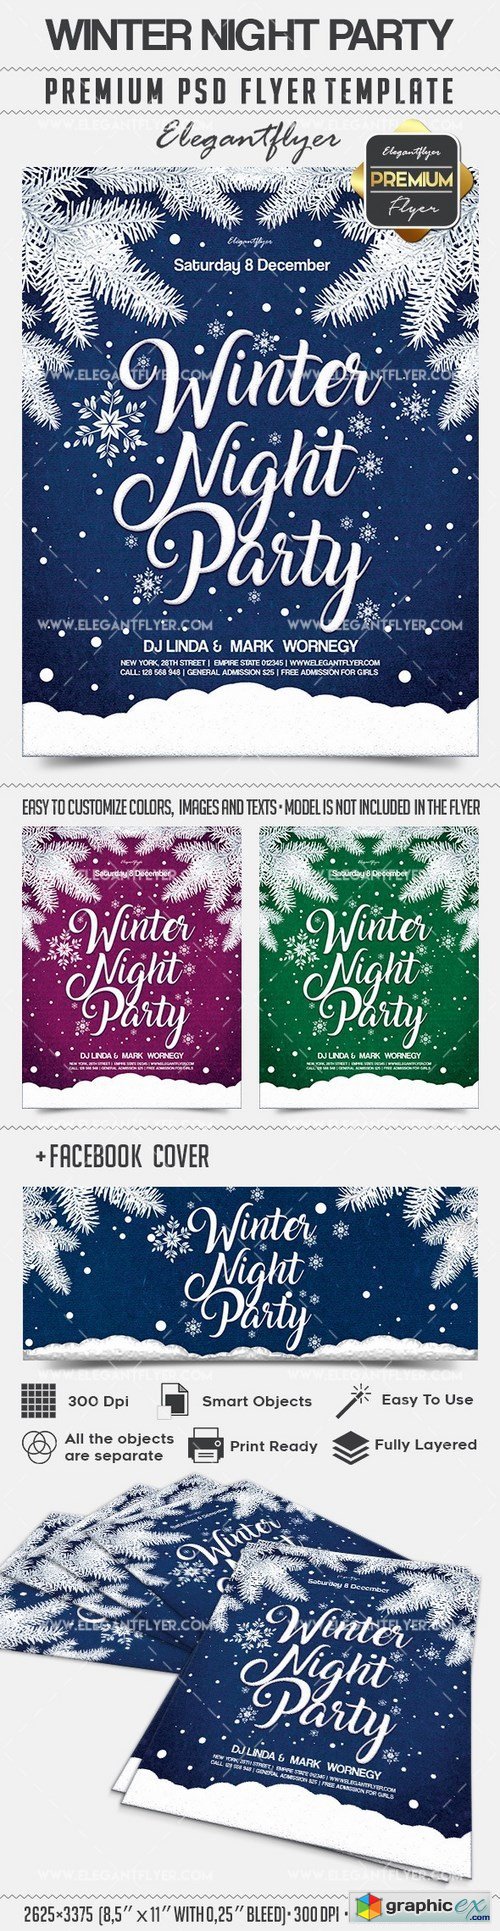 Winter Night Party  Flyer PSD Template + Facebook Cover